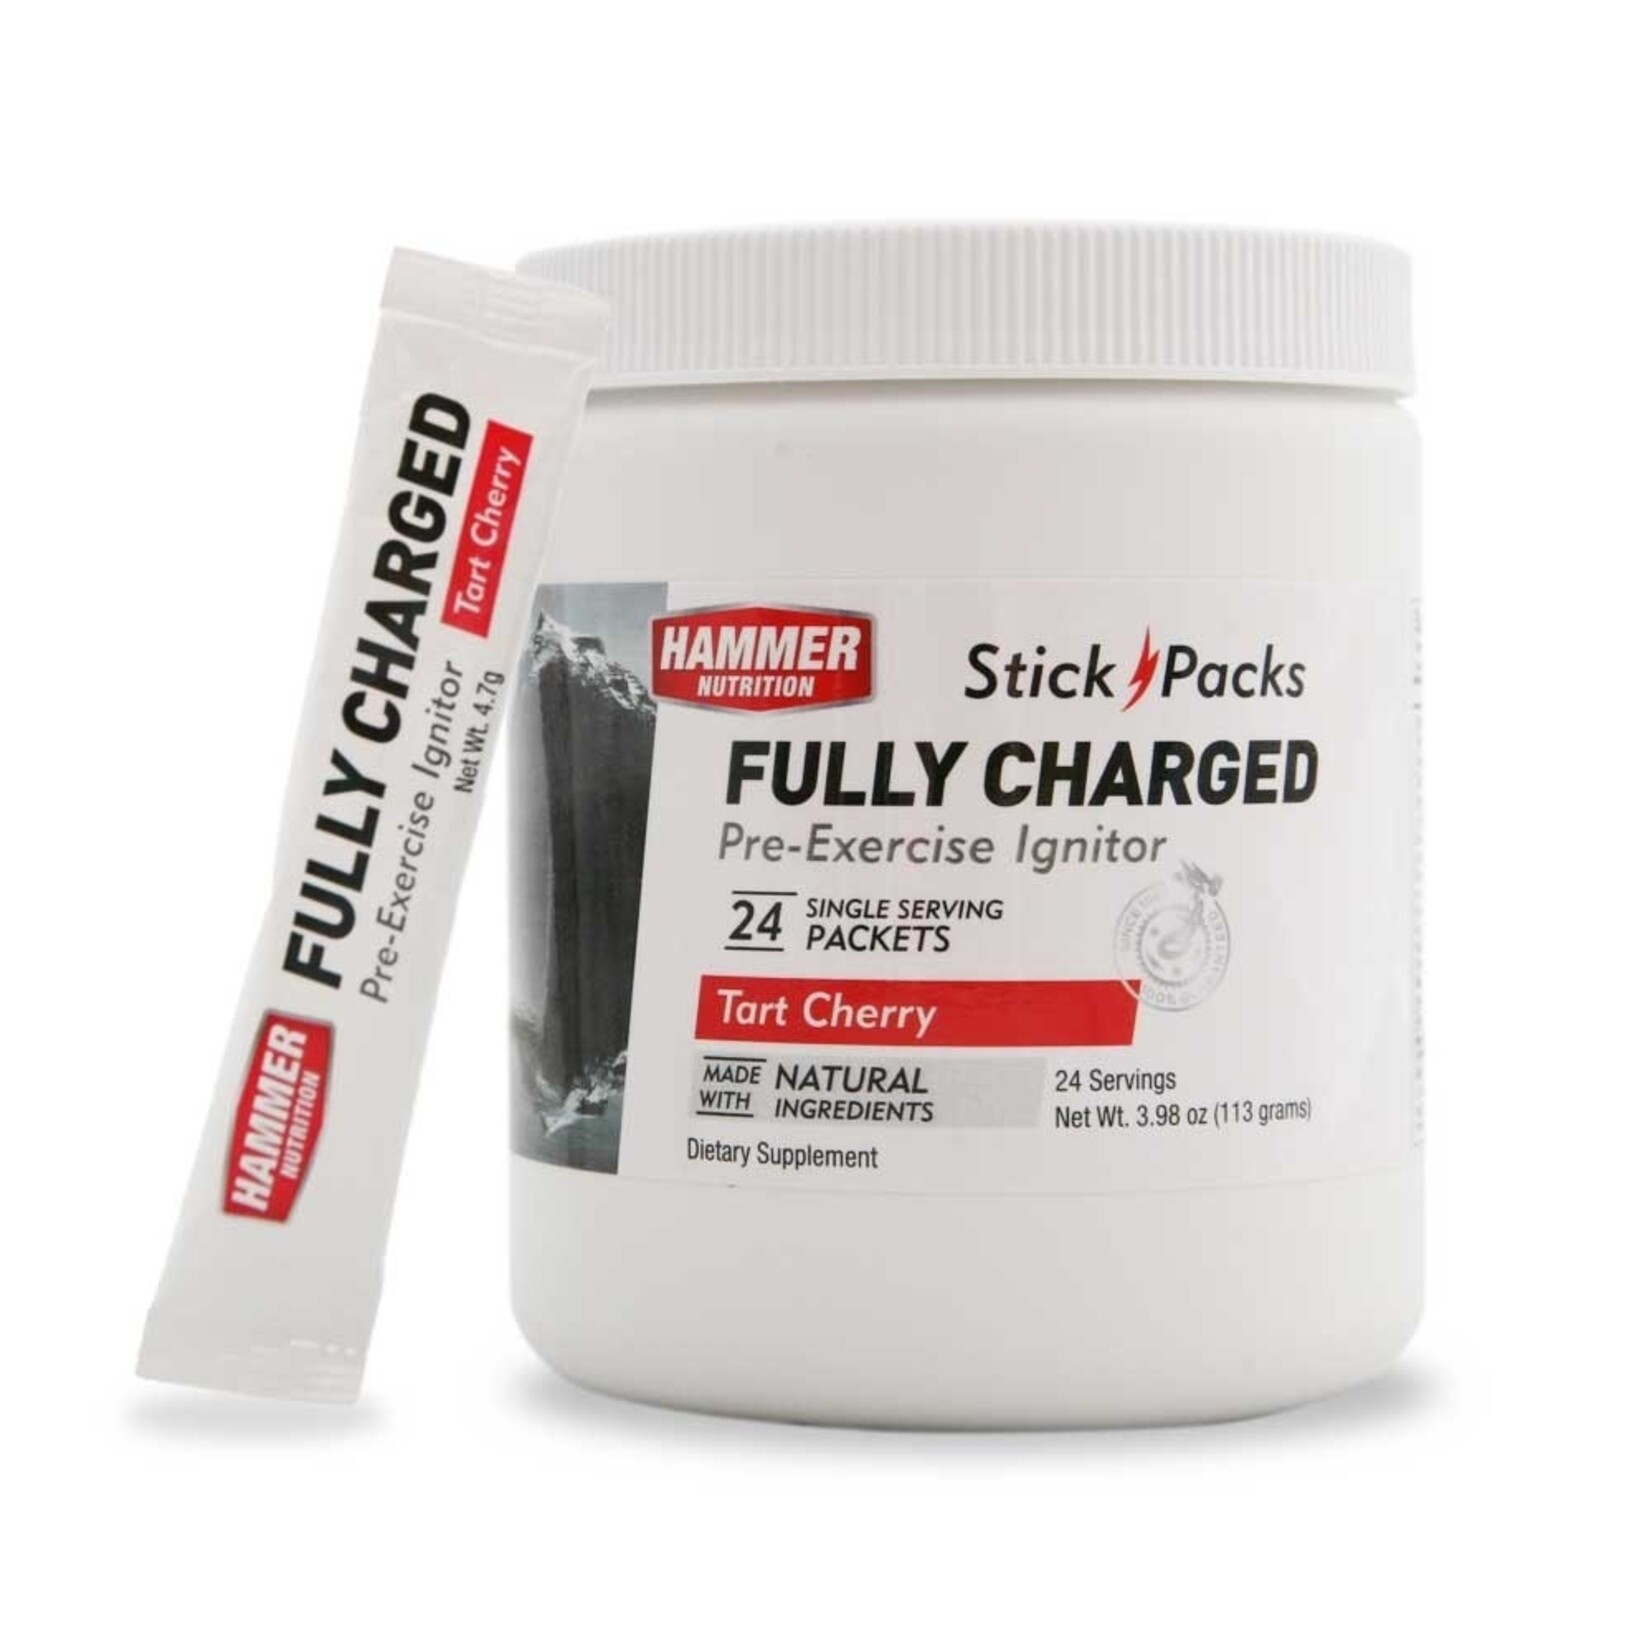 Hammer fully charged pre-exercise ignitor tart cherry stick packs